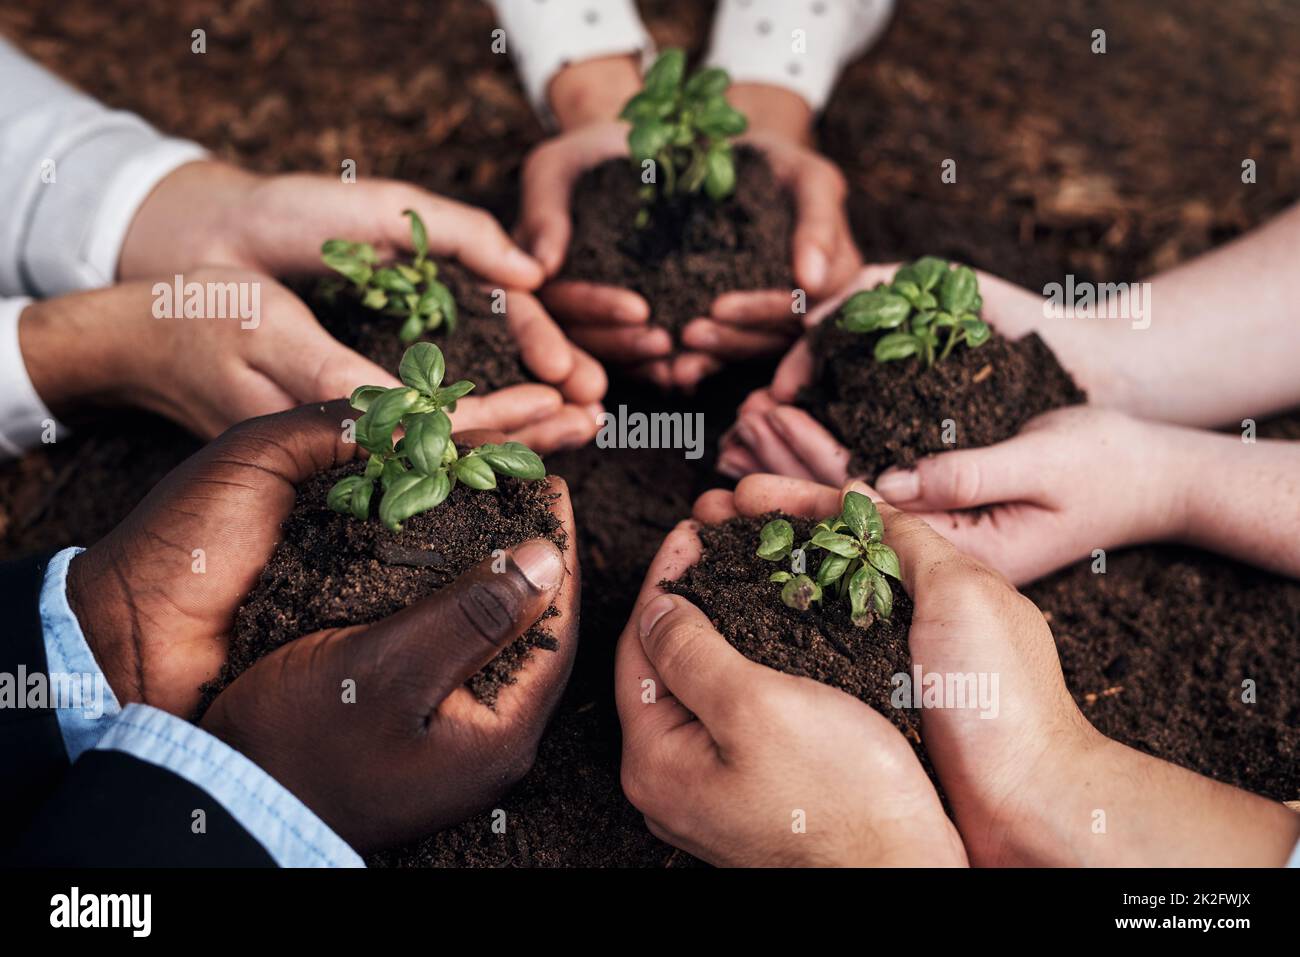 Work together, grow together. Cropped shot of a group of businesspeople holding plants growing out of soil. Stock Photo